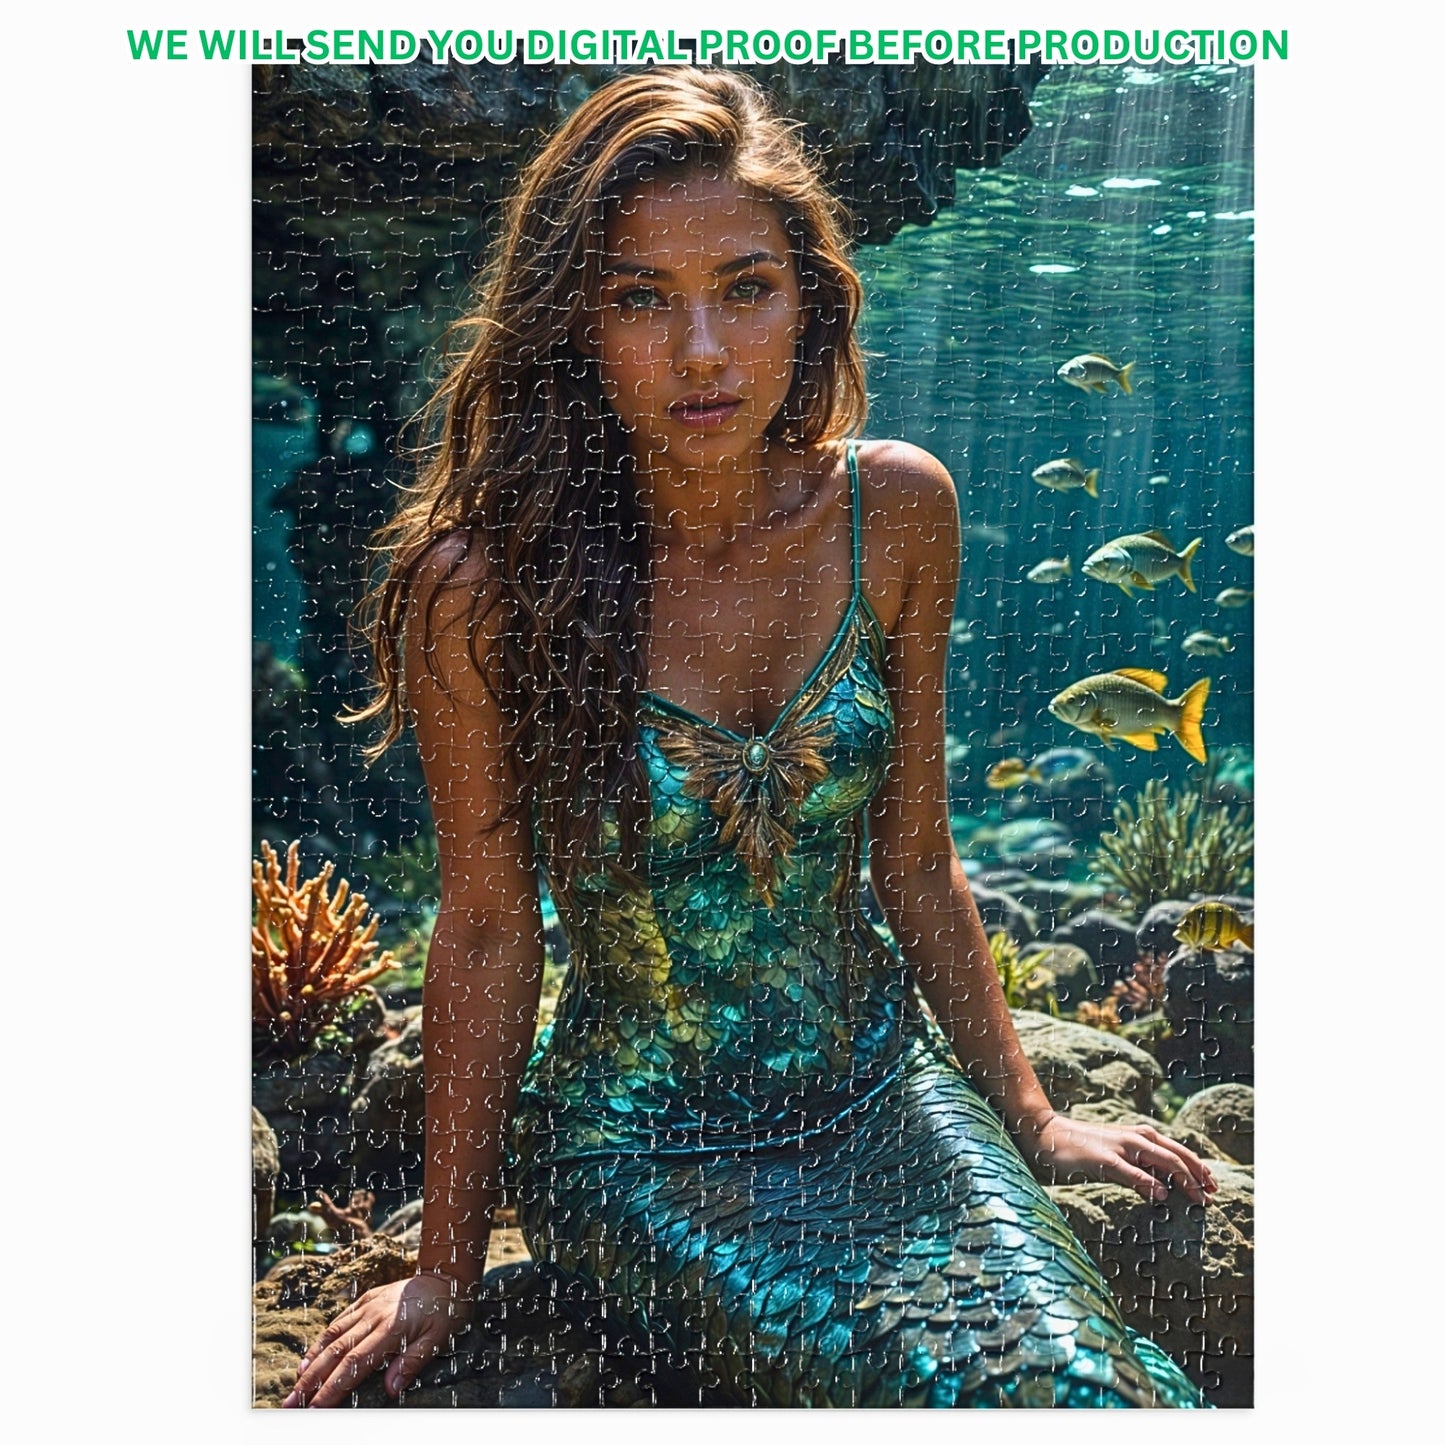 Turn your photo into a personalized mermaid puzzle! Customize a princess portrait for a special birthday gift. Available in 250 to 1000 pieces. Lady mermaid gifts, princess gifts, and mermaid photo gifts are options. Transform any image into a unique mermaid art puzzle. Perfect for mermaid and princess enthusiasts. Order your custom puzzle creation today!